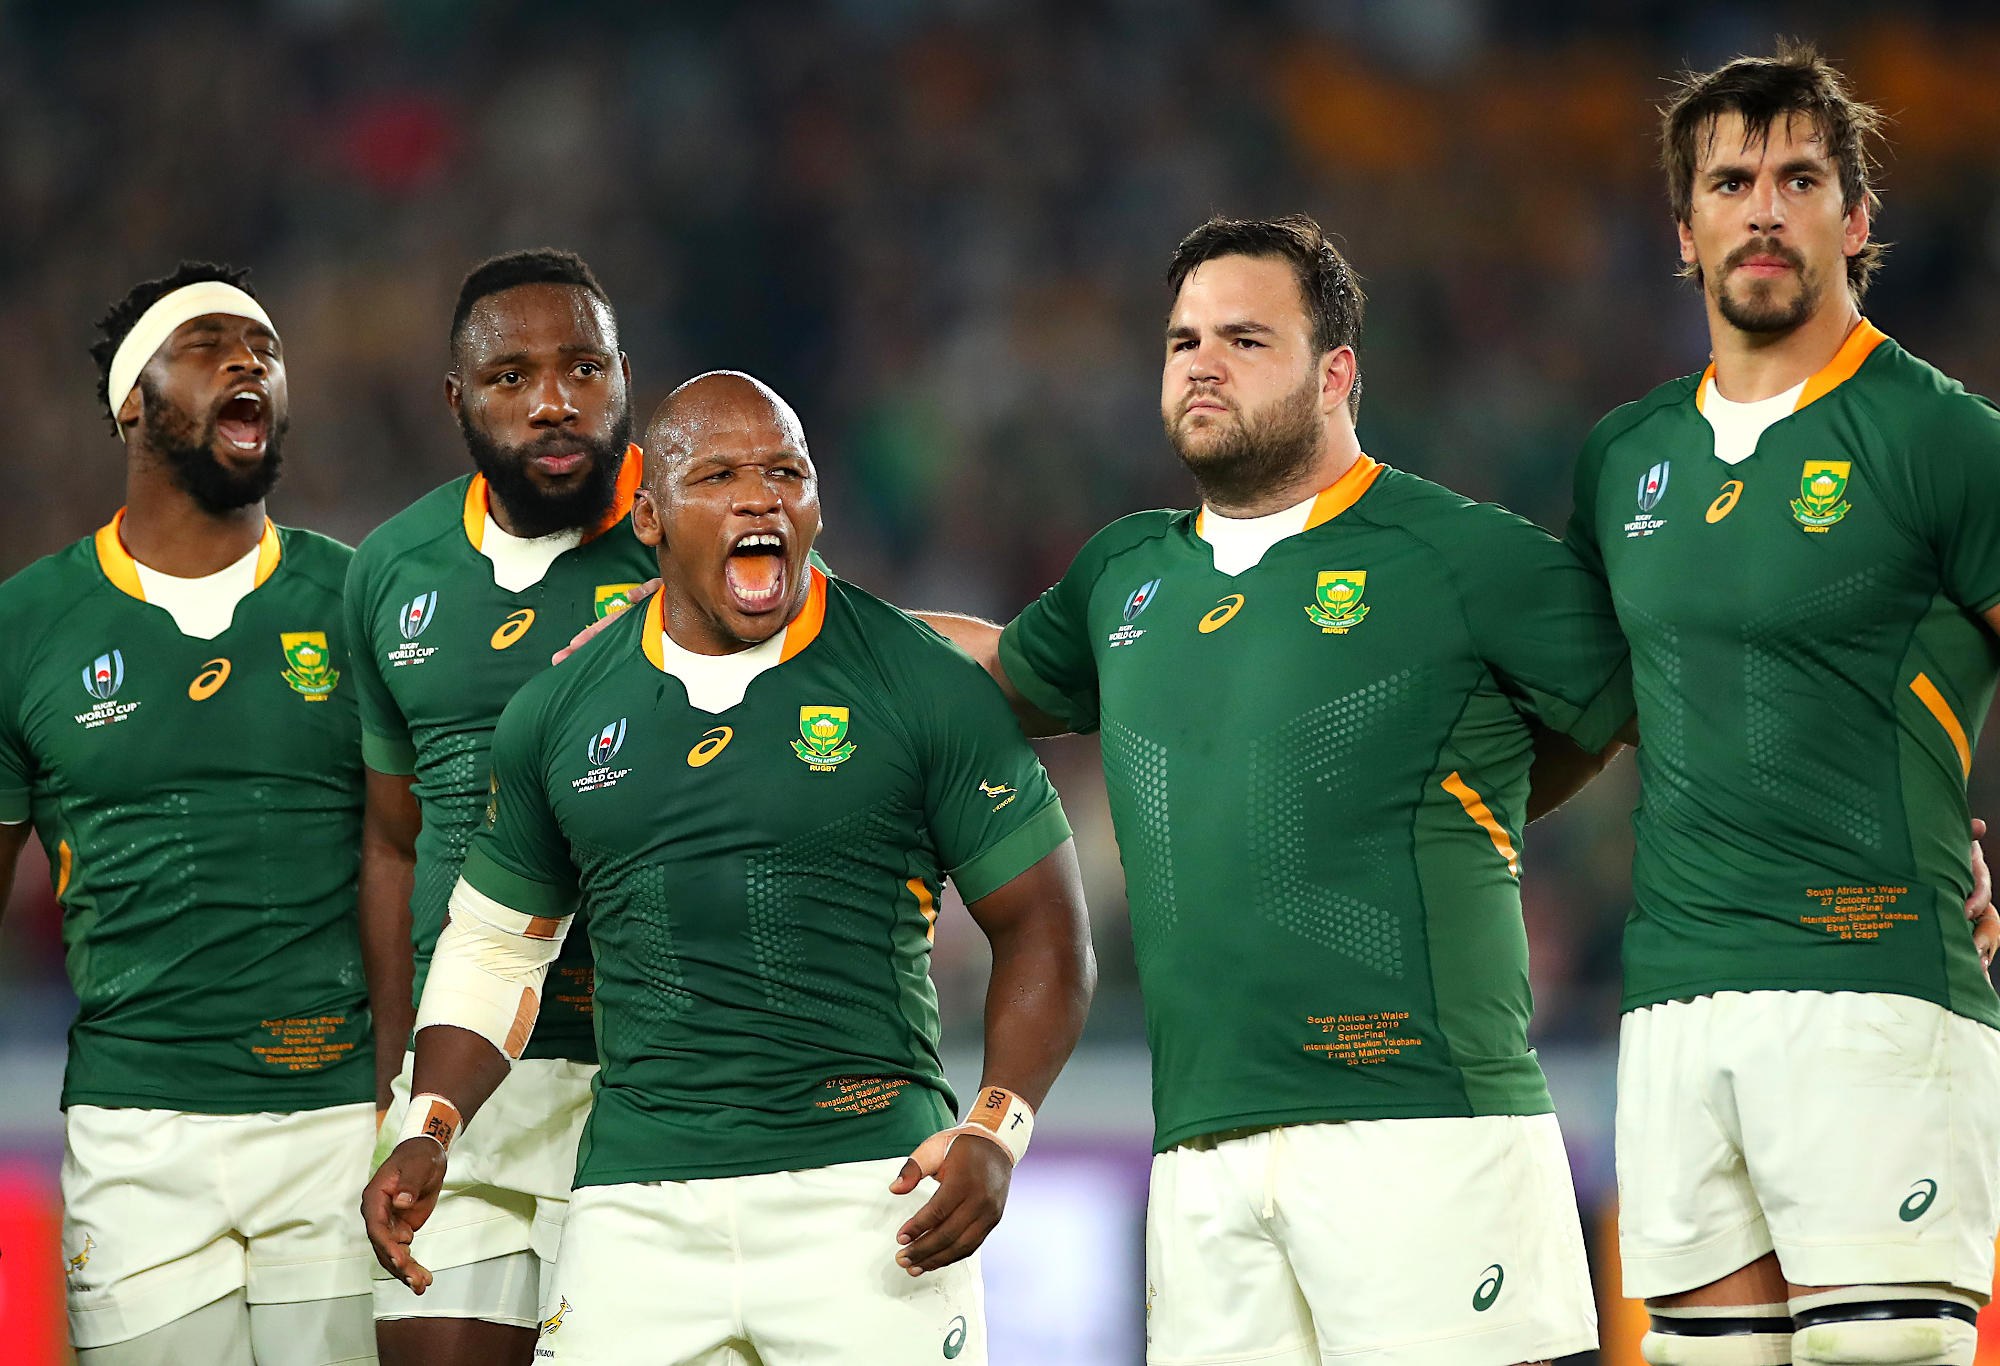 From savvy selection to superior scrum: How the Springboks won the Rugby World Cup